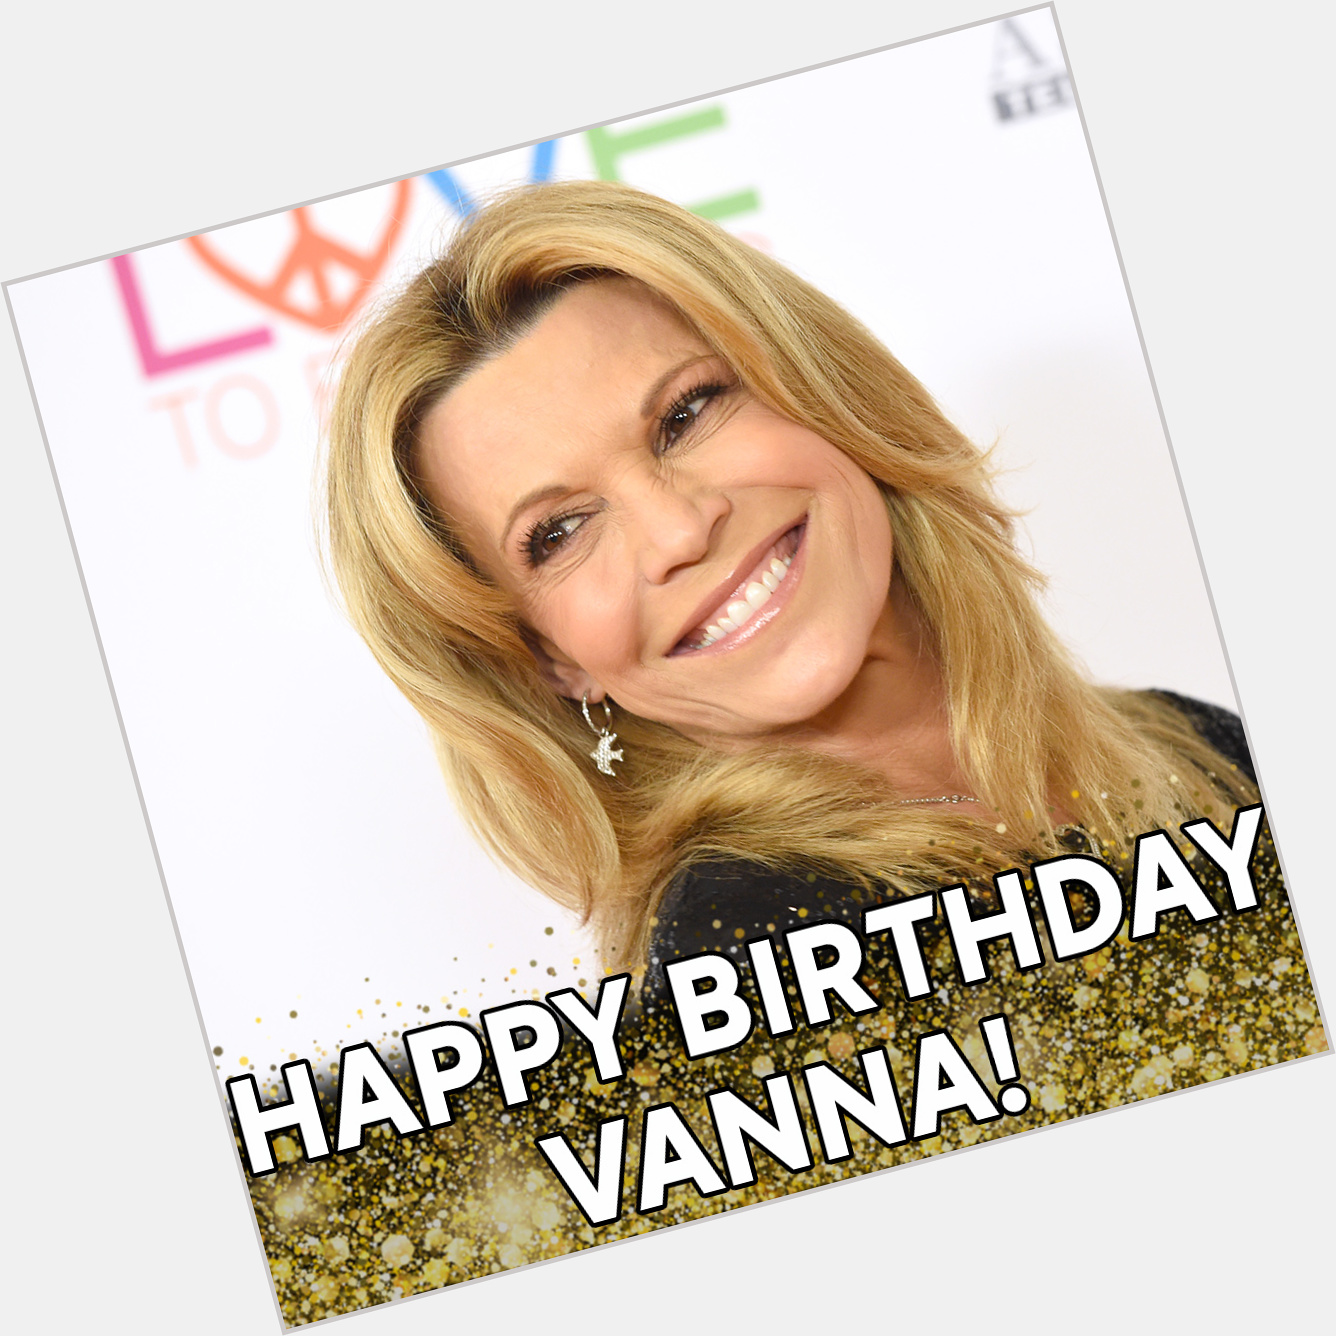 Join us in wishing Wheel of Fortune\s Vanna White a very happy birthday! 